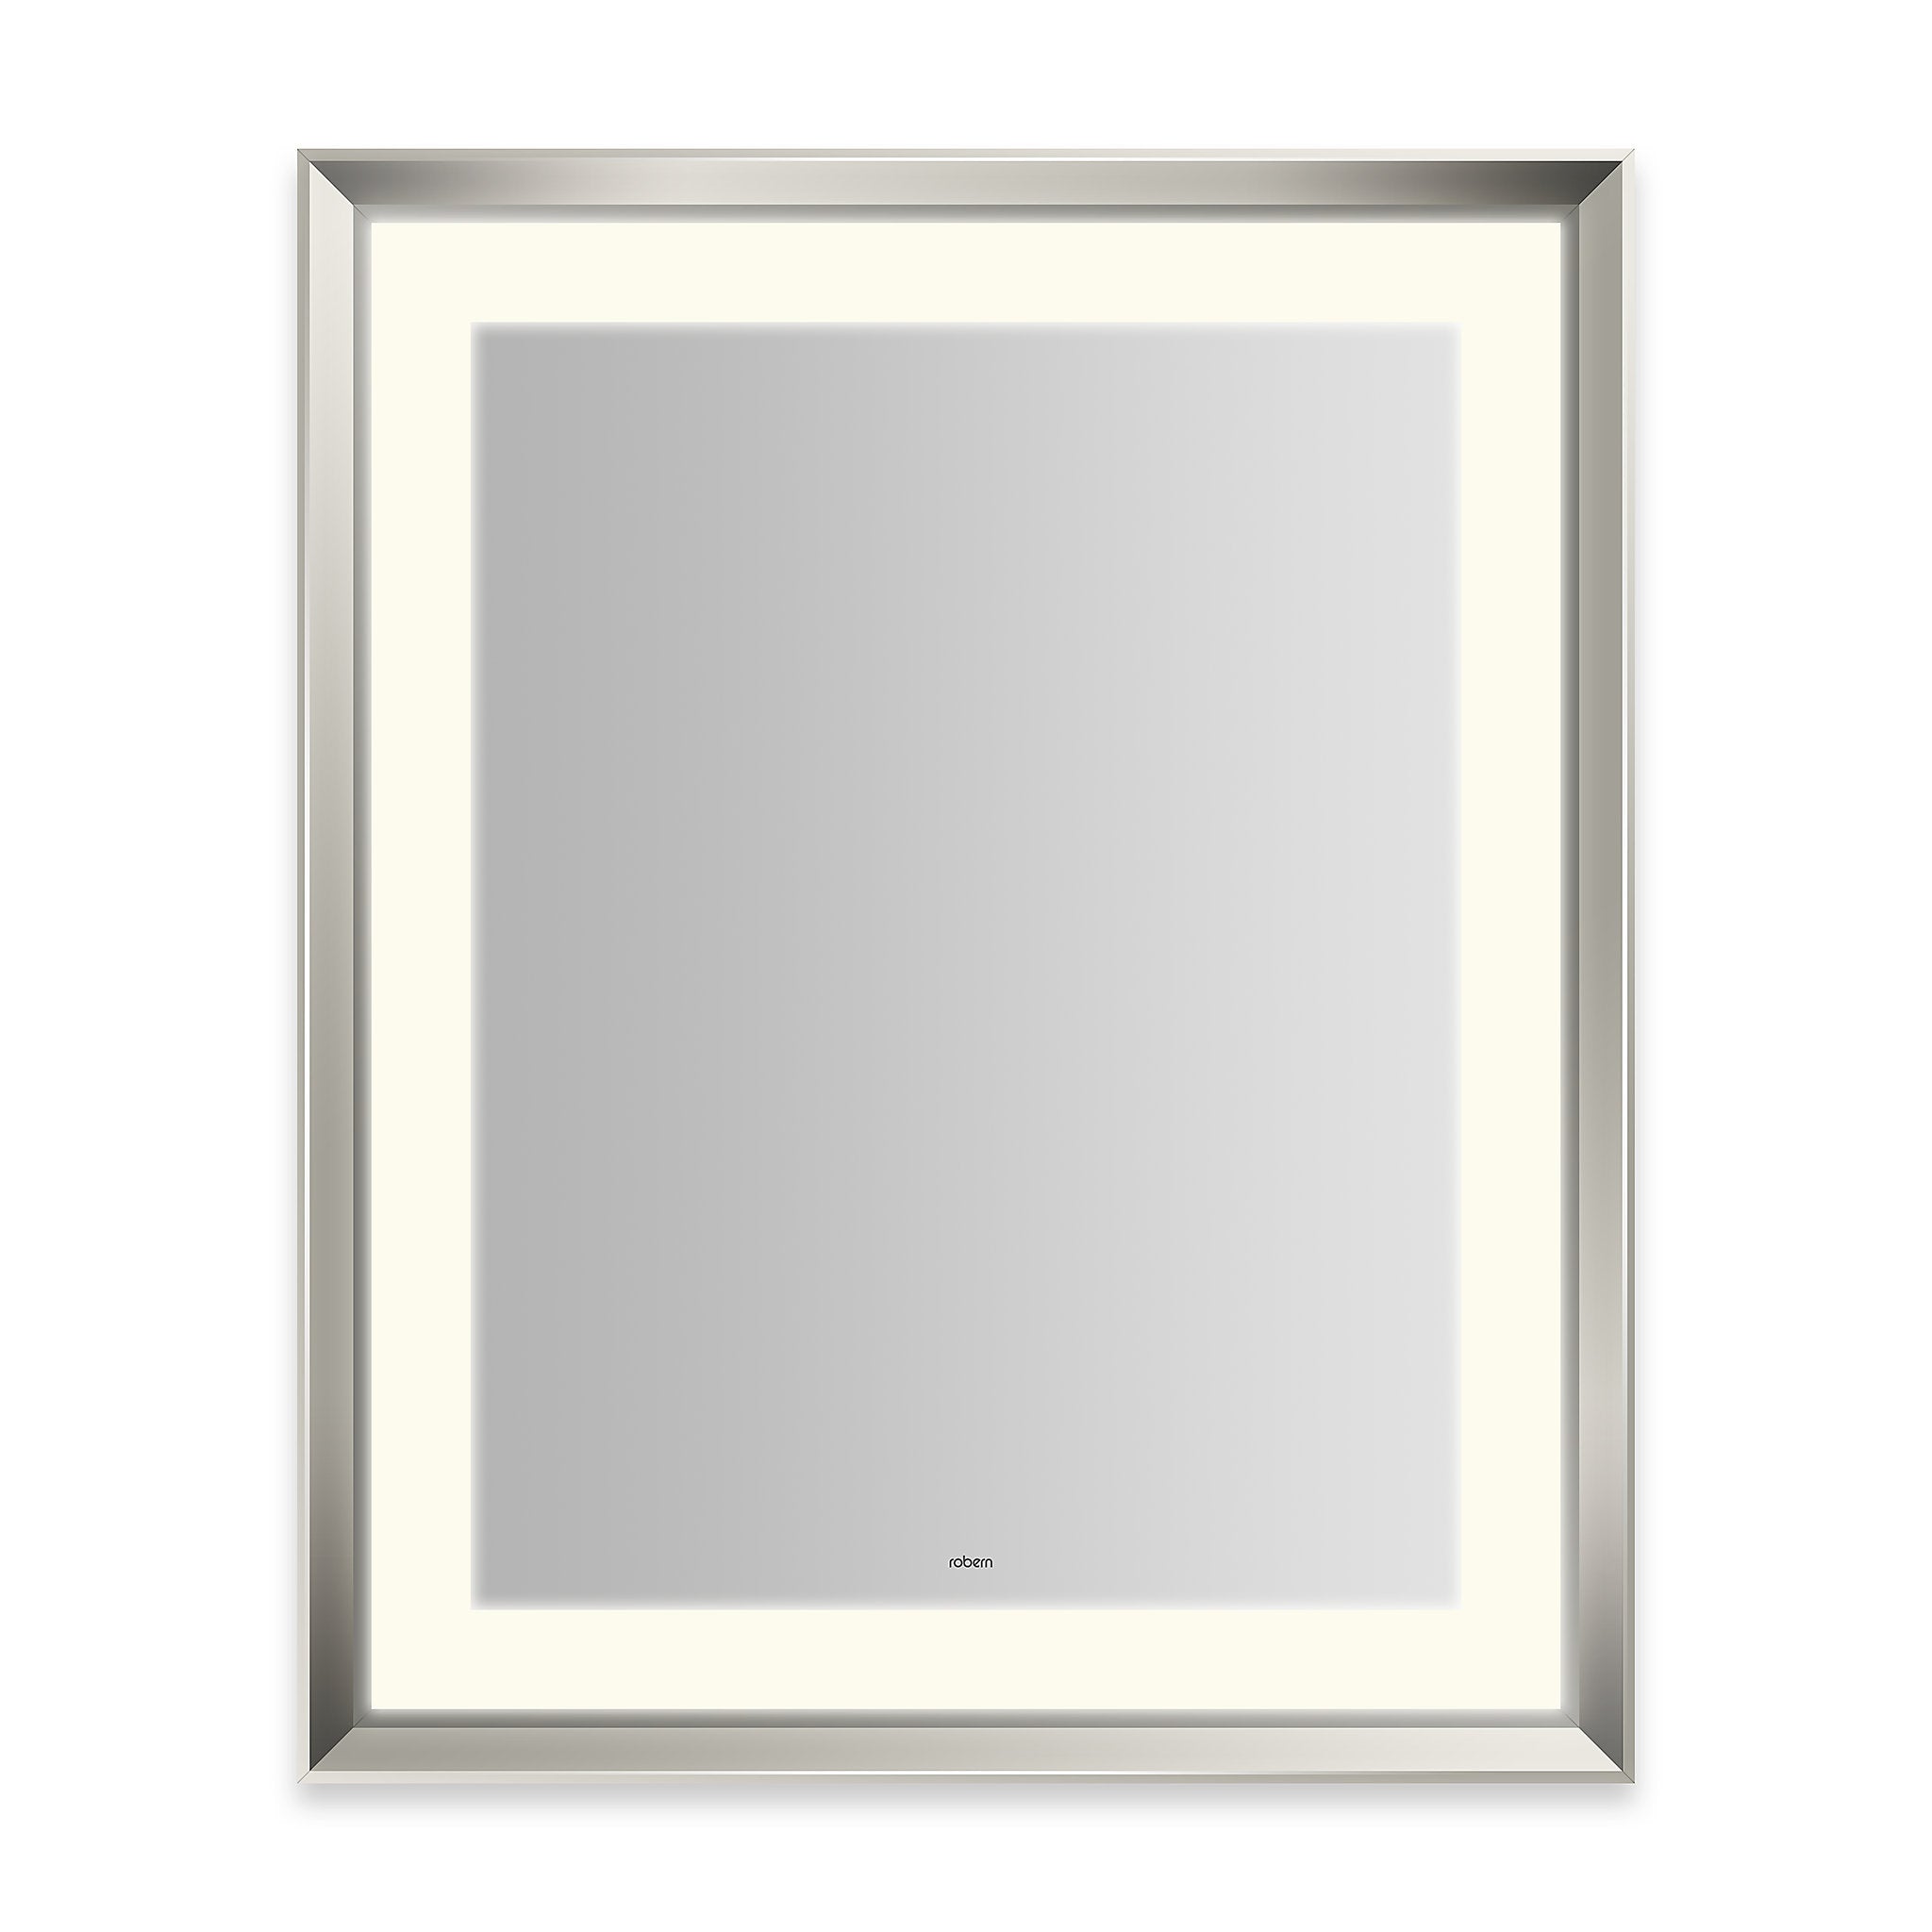 robern YM2733RPCMD3K76 Sculpt Lighted Mirror, 27 x 33 x 2-5/16, Chamfer Museum Frame, Chrome, Perimeter Light Pattern, 2700K Color Temperature (Warm White), Dimmable, Defogger, Title 24 Compliant